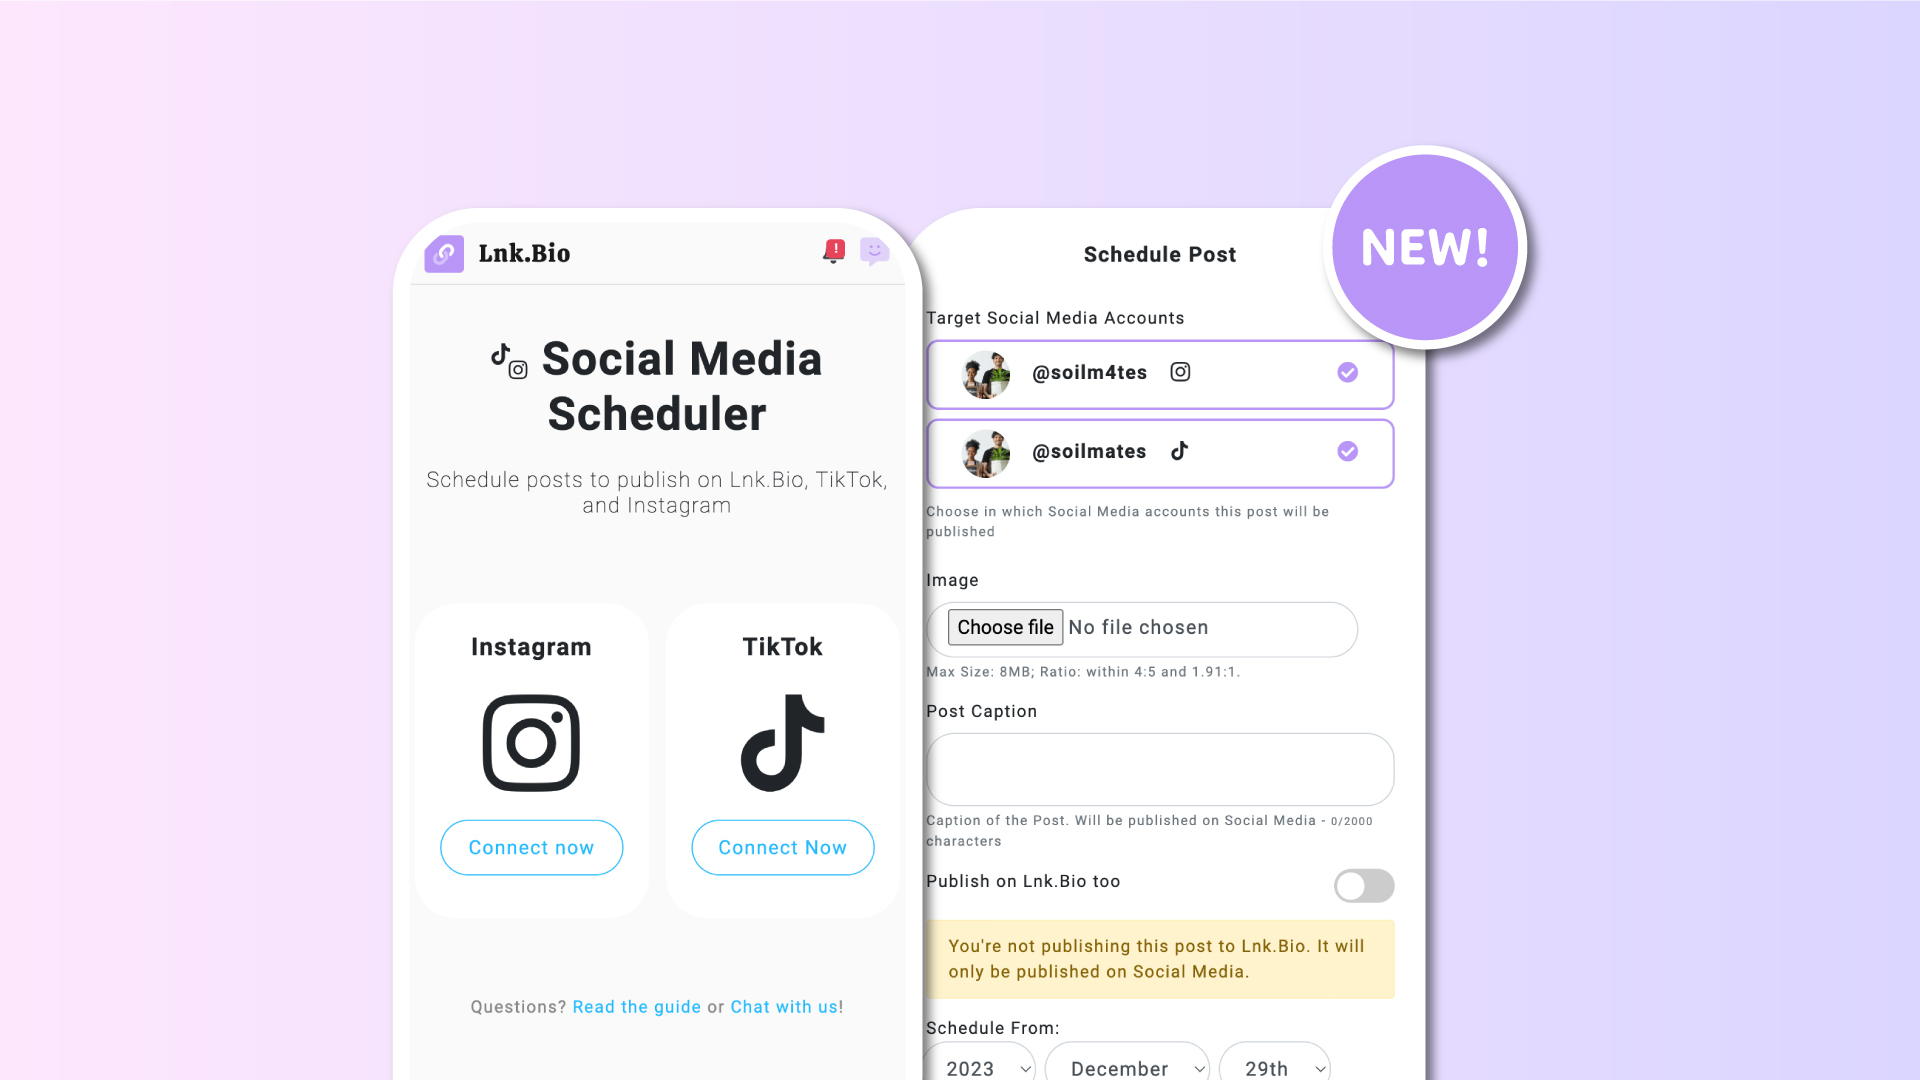 TikTok Scheduler: publish Videos and Images on TikTok directly from Lnk.Bio